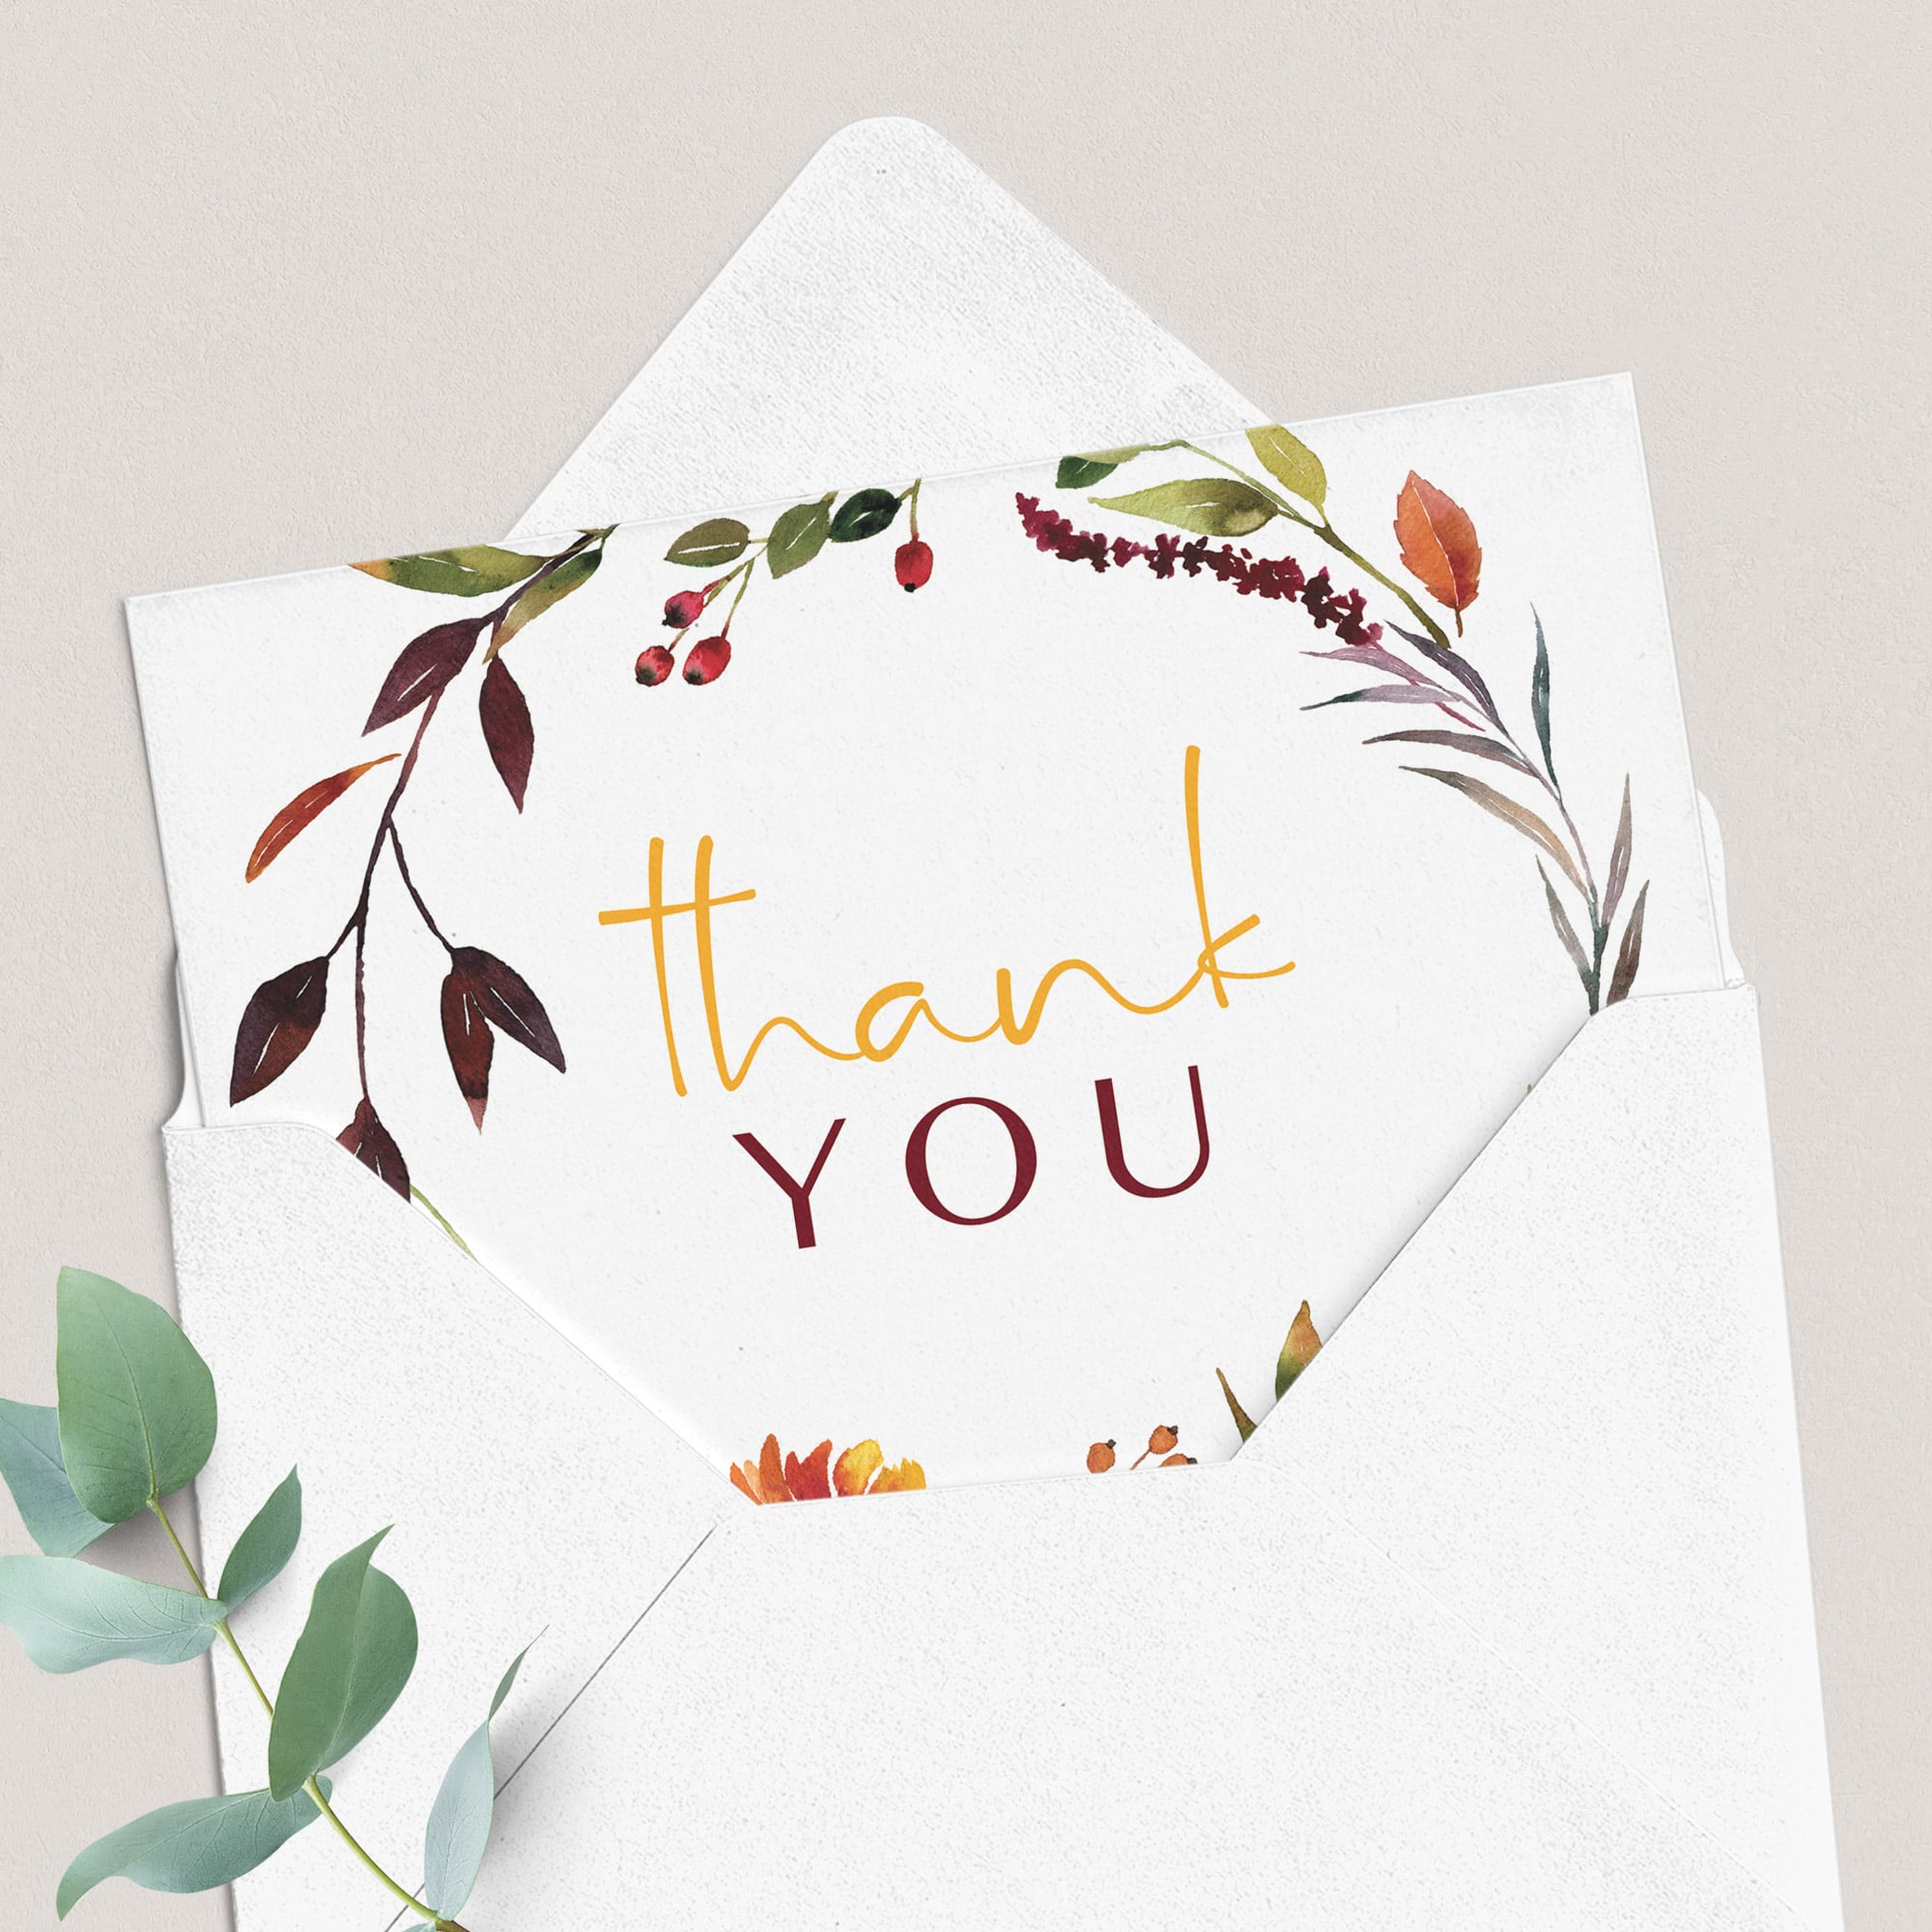 Thank you cards printable with watercolor floral greenery wreath by LittleSizzle